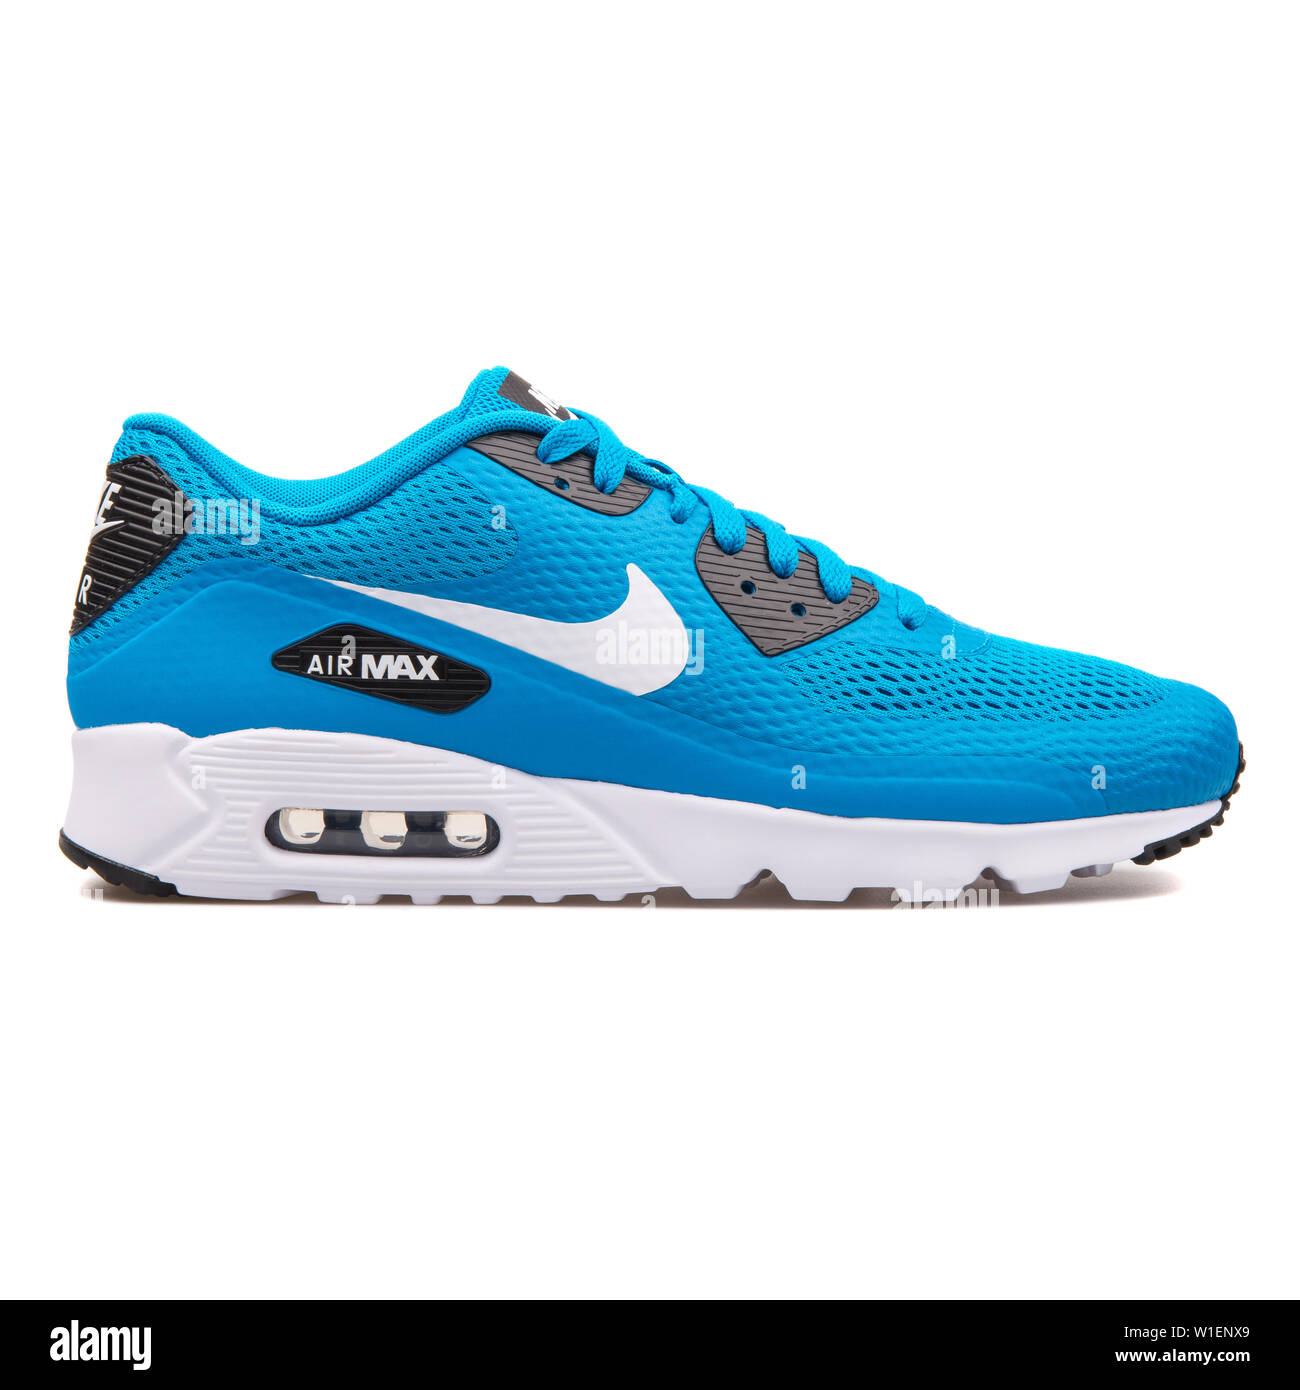 VIENNA, AUSTRIA - AUGUST 10, 2017: Nike Air Max 90 Ultra Essential cyan and  white sneaker on white background Stock Photo - Alamy